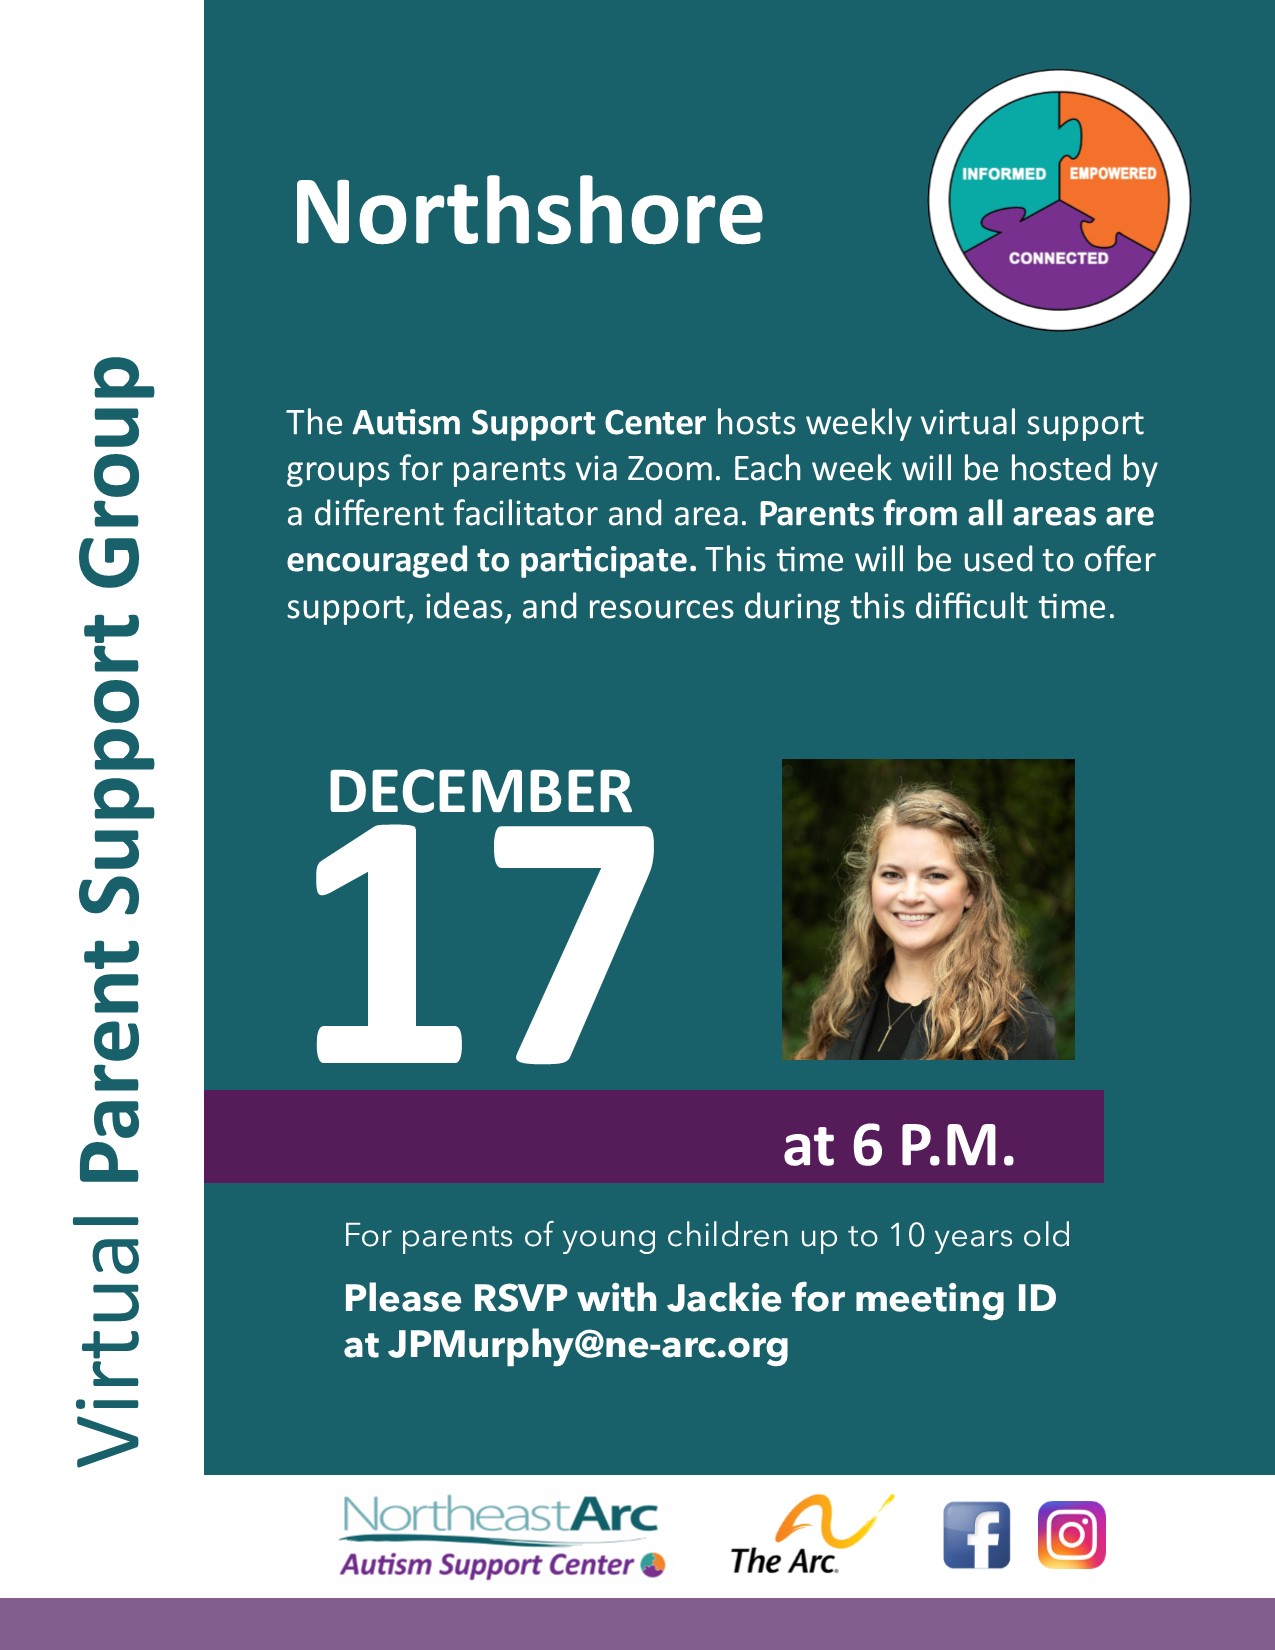 Flyer for Autism Support Group on December 17th at 6pm